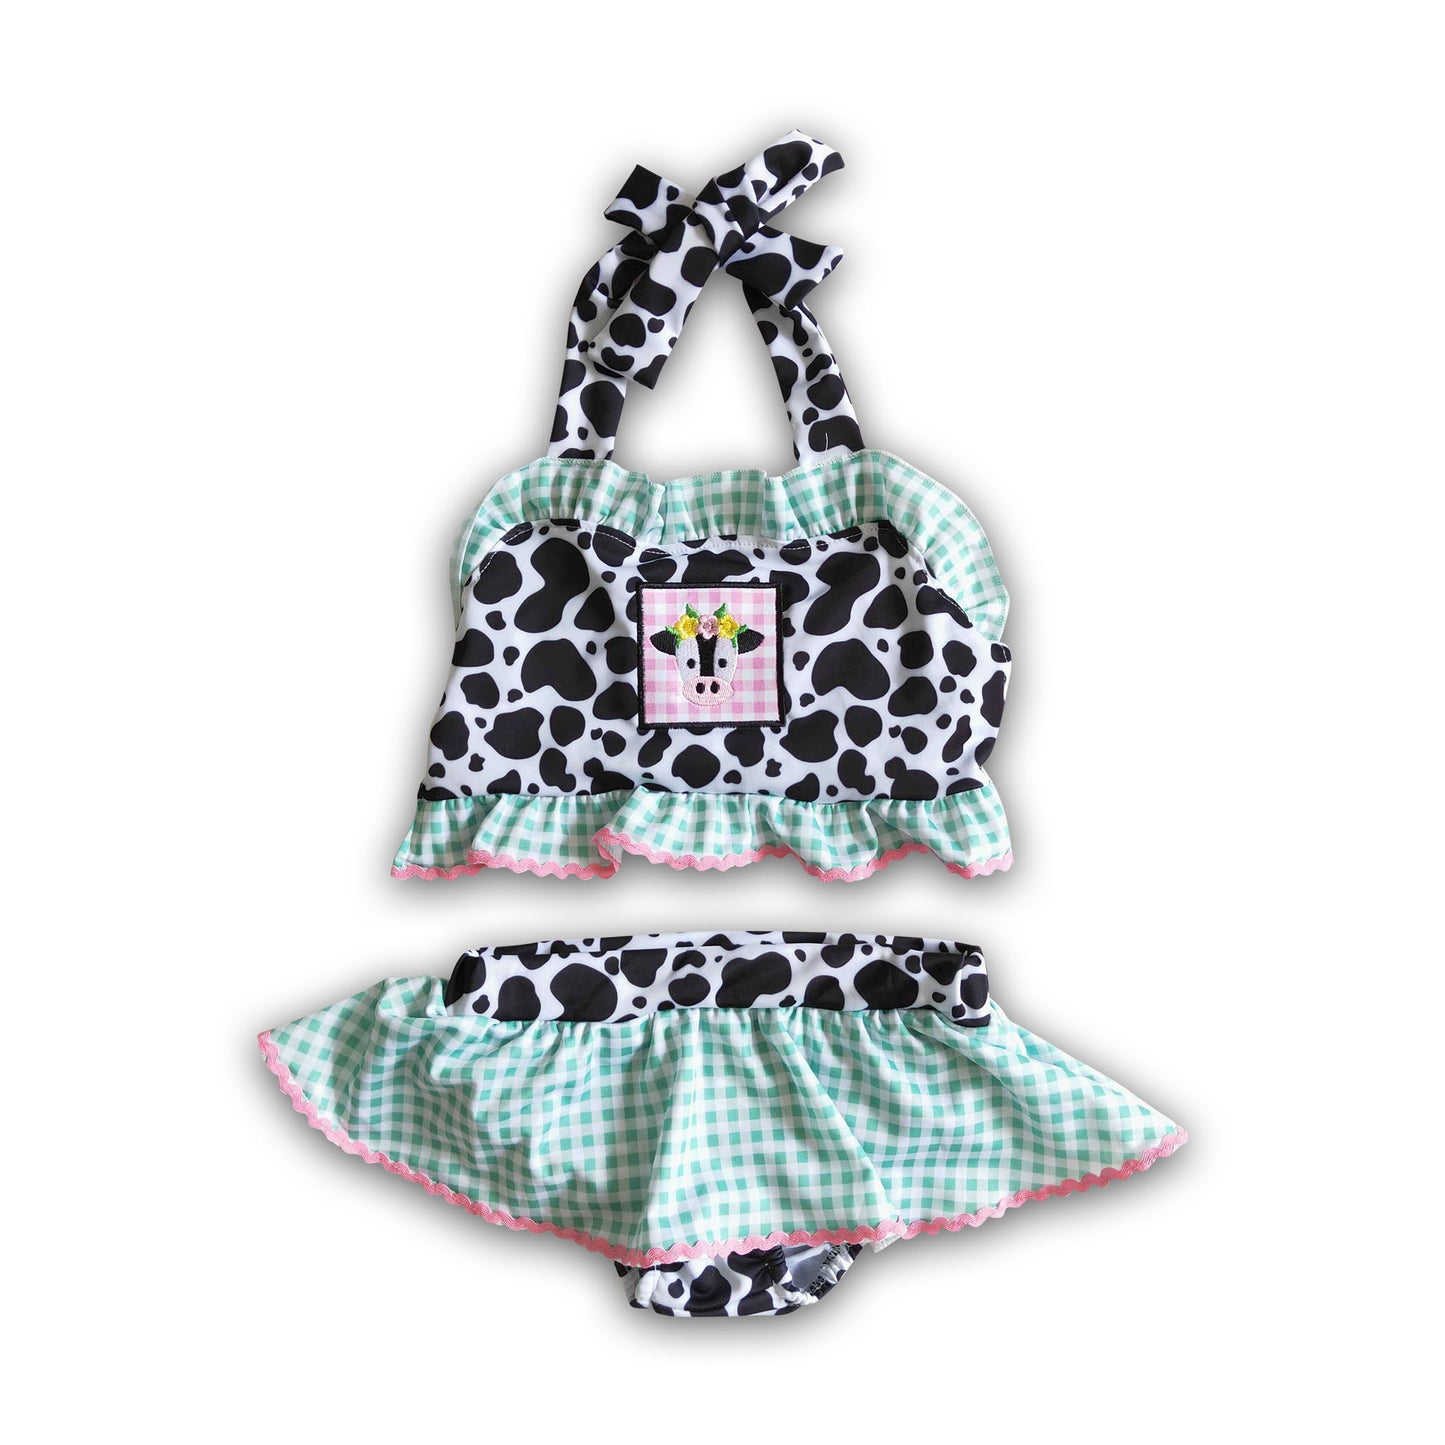 Cow embroidery plaid bath suit baby girls swimsuit